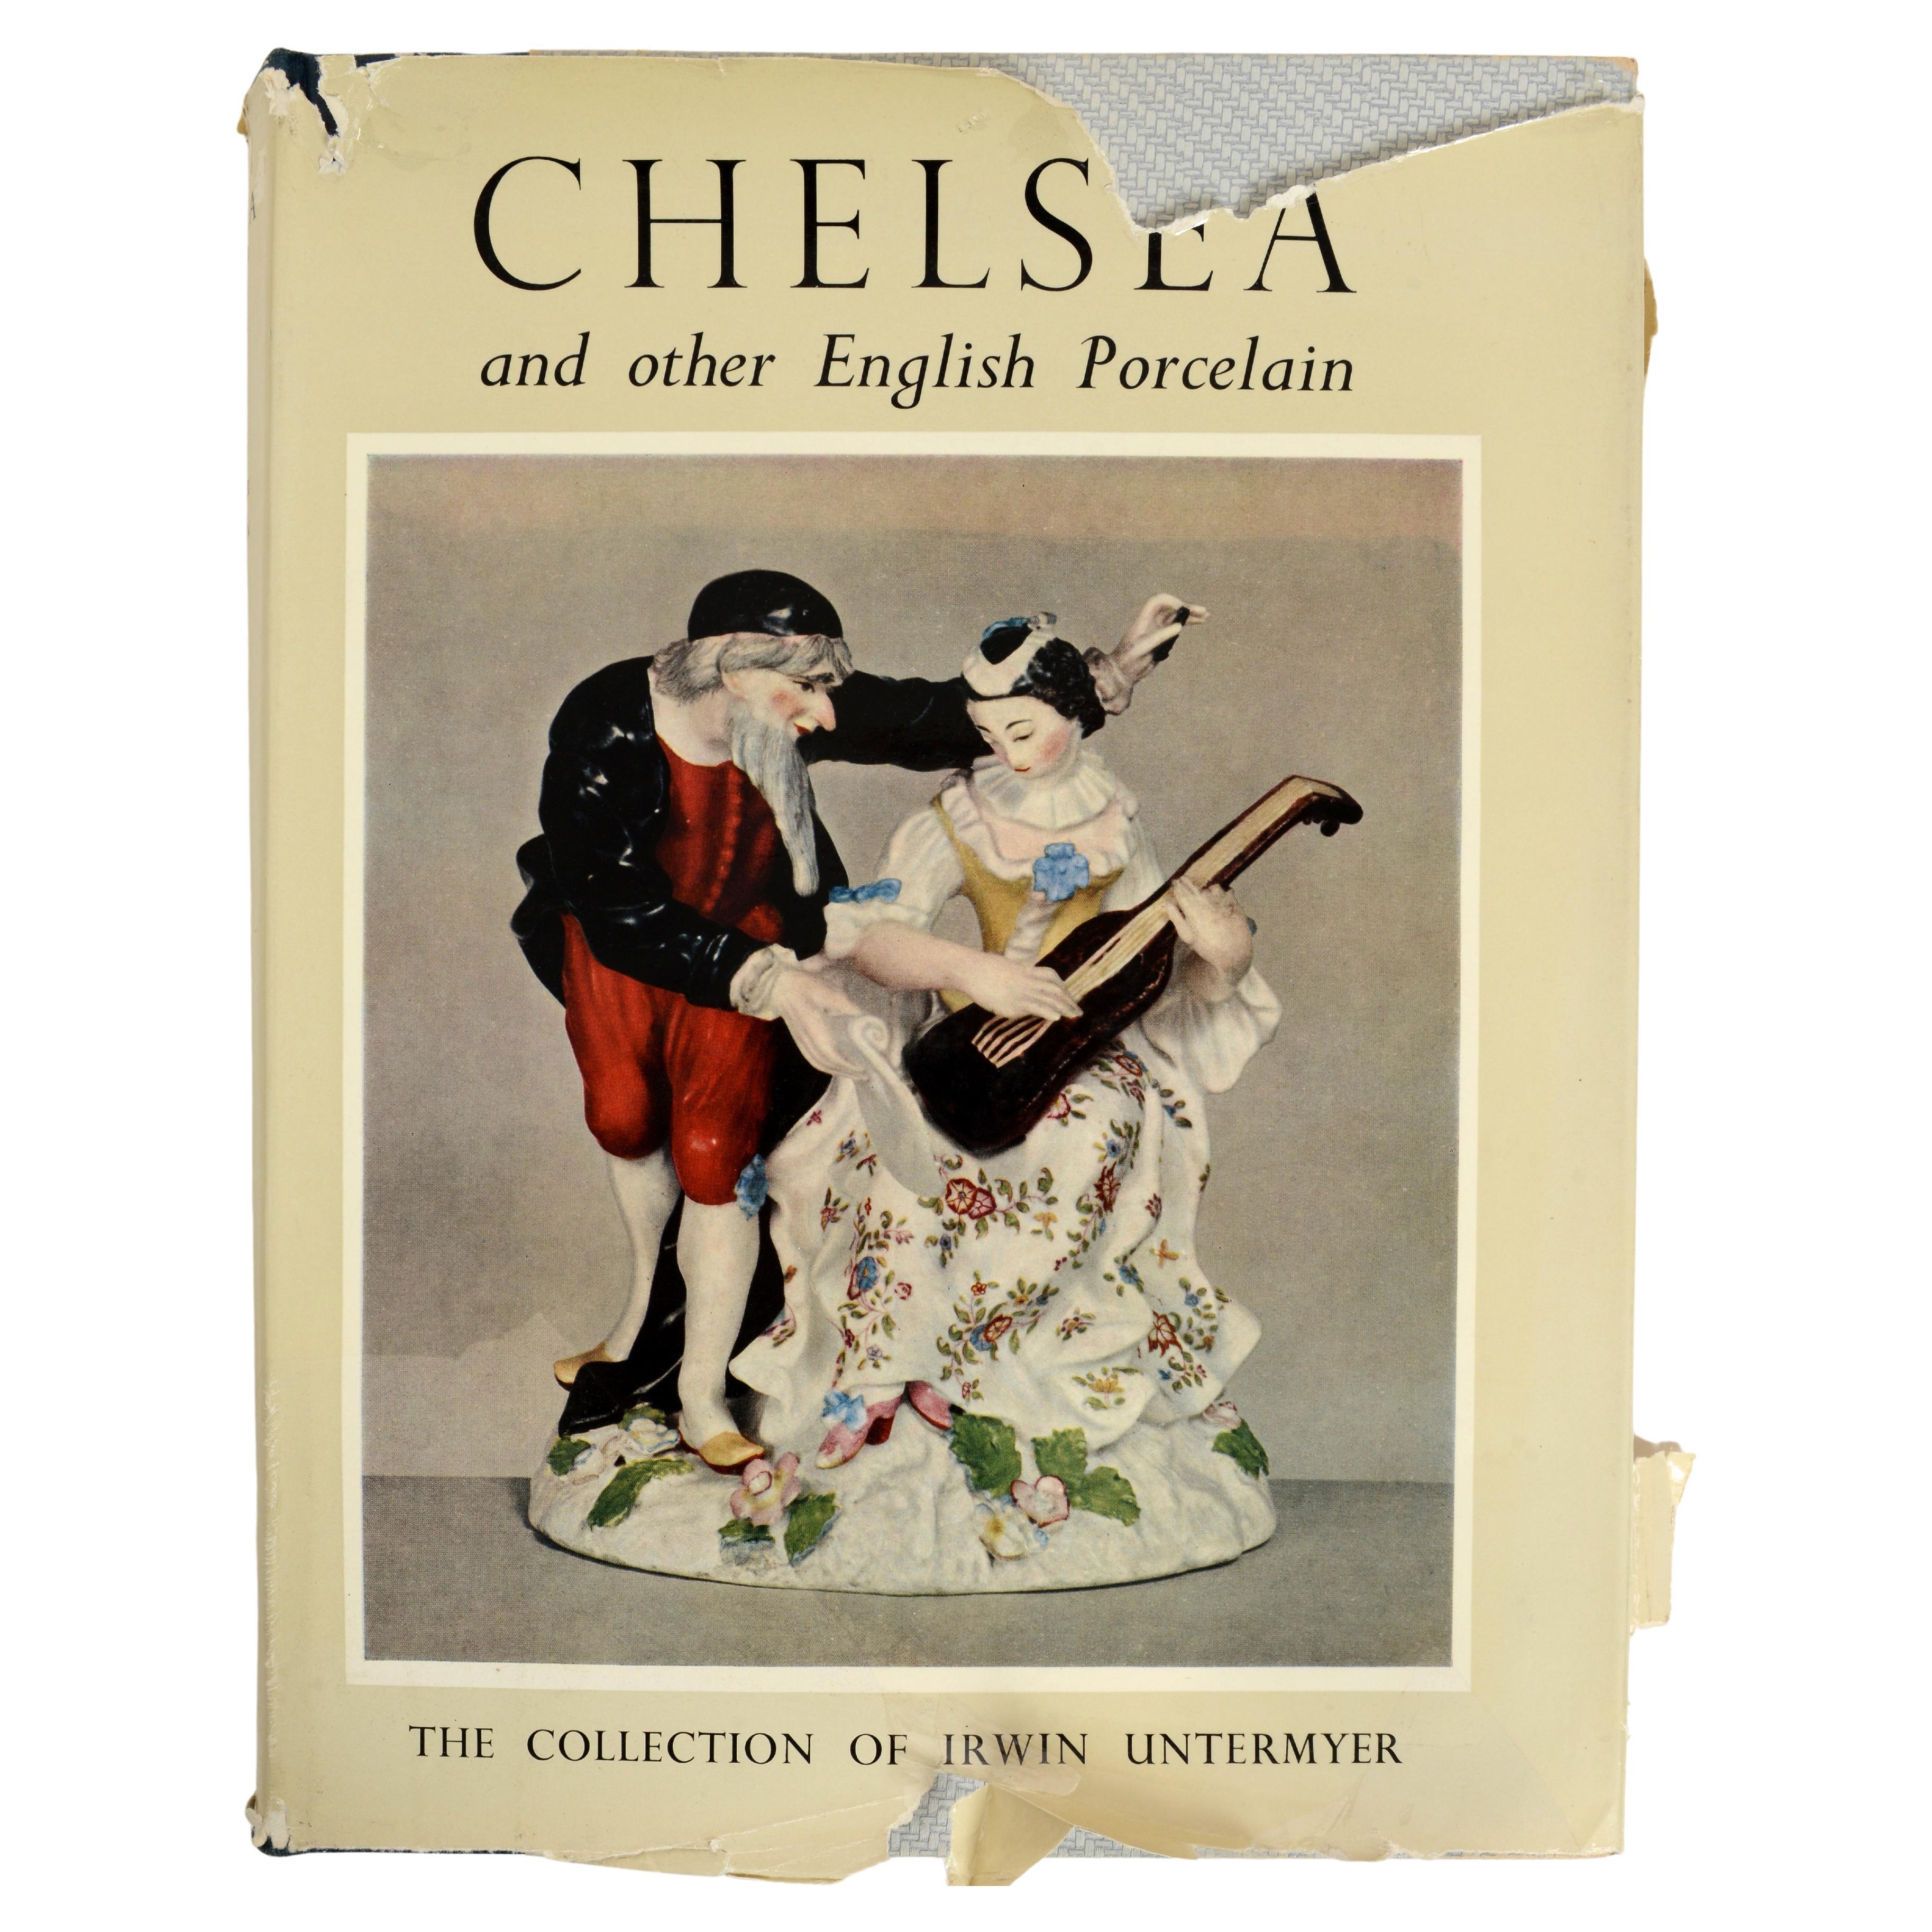 Chelsea & Other Porcelain Pottery & Enamel in the Irwin Untermyer Coll